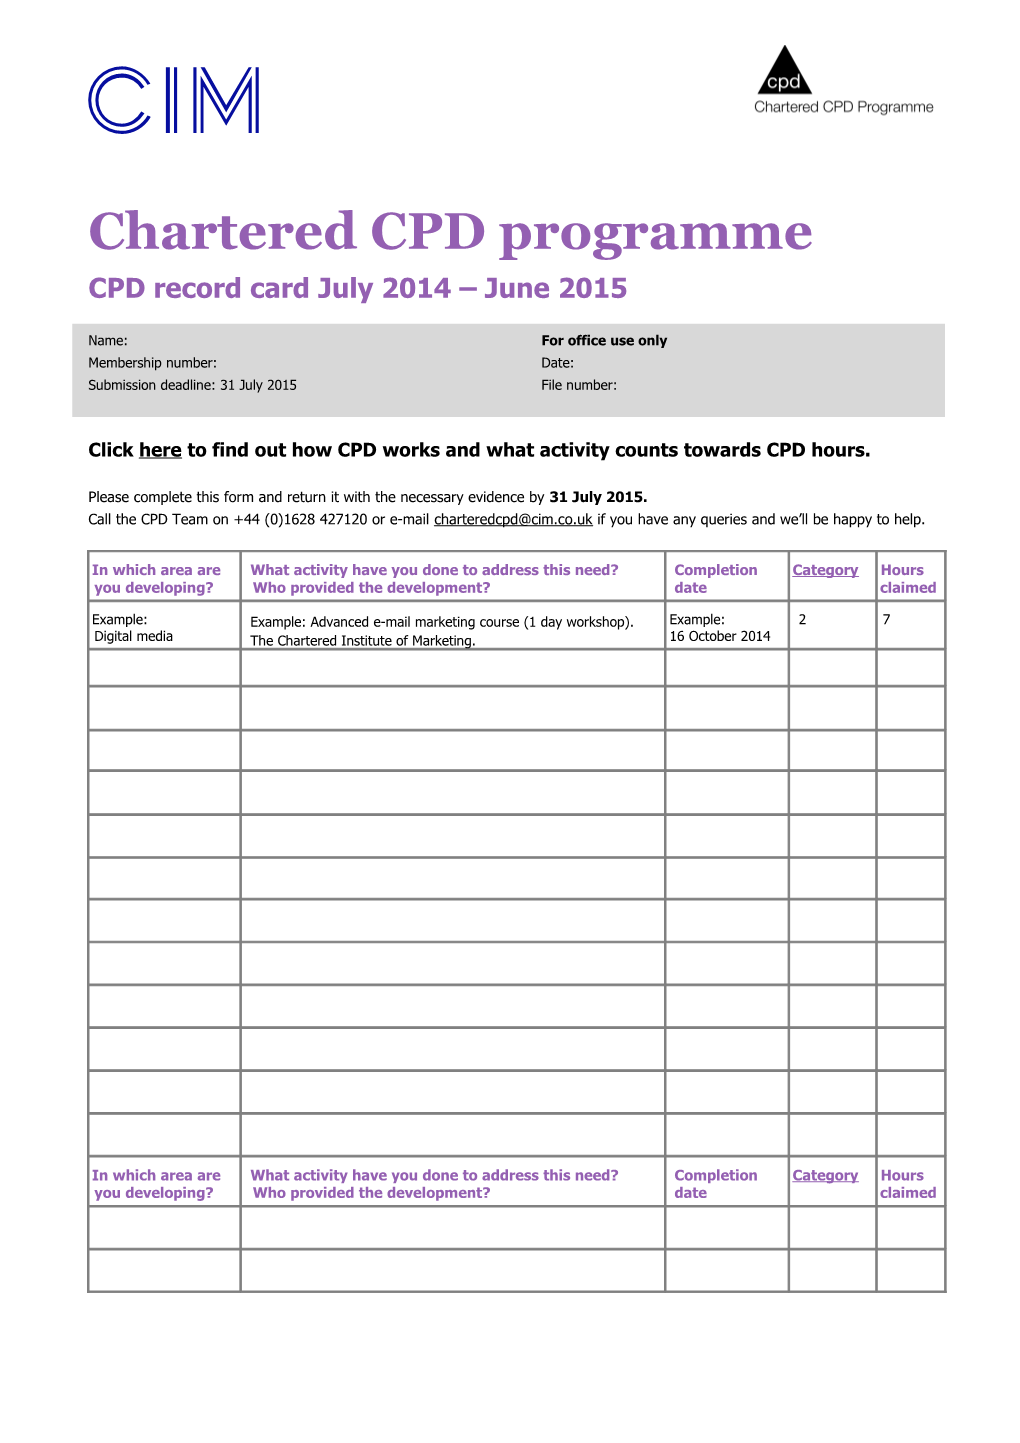 Chartered CPD Programme Record Card 2014/2015